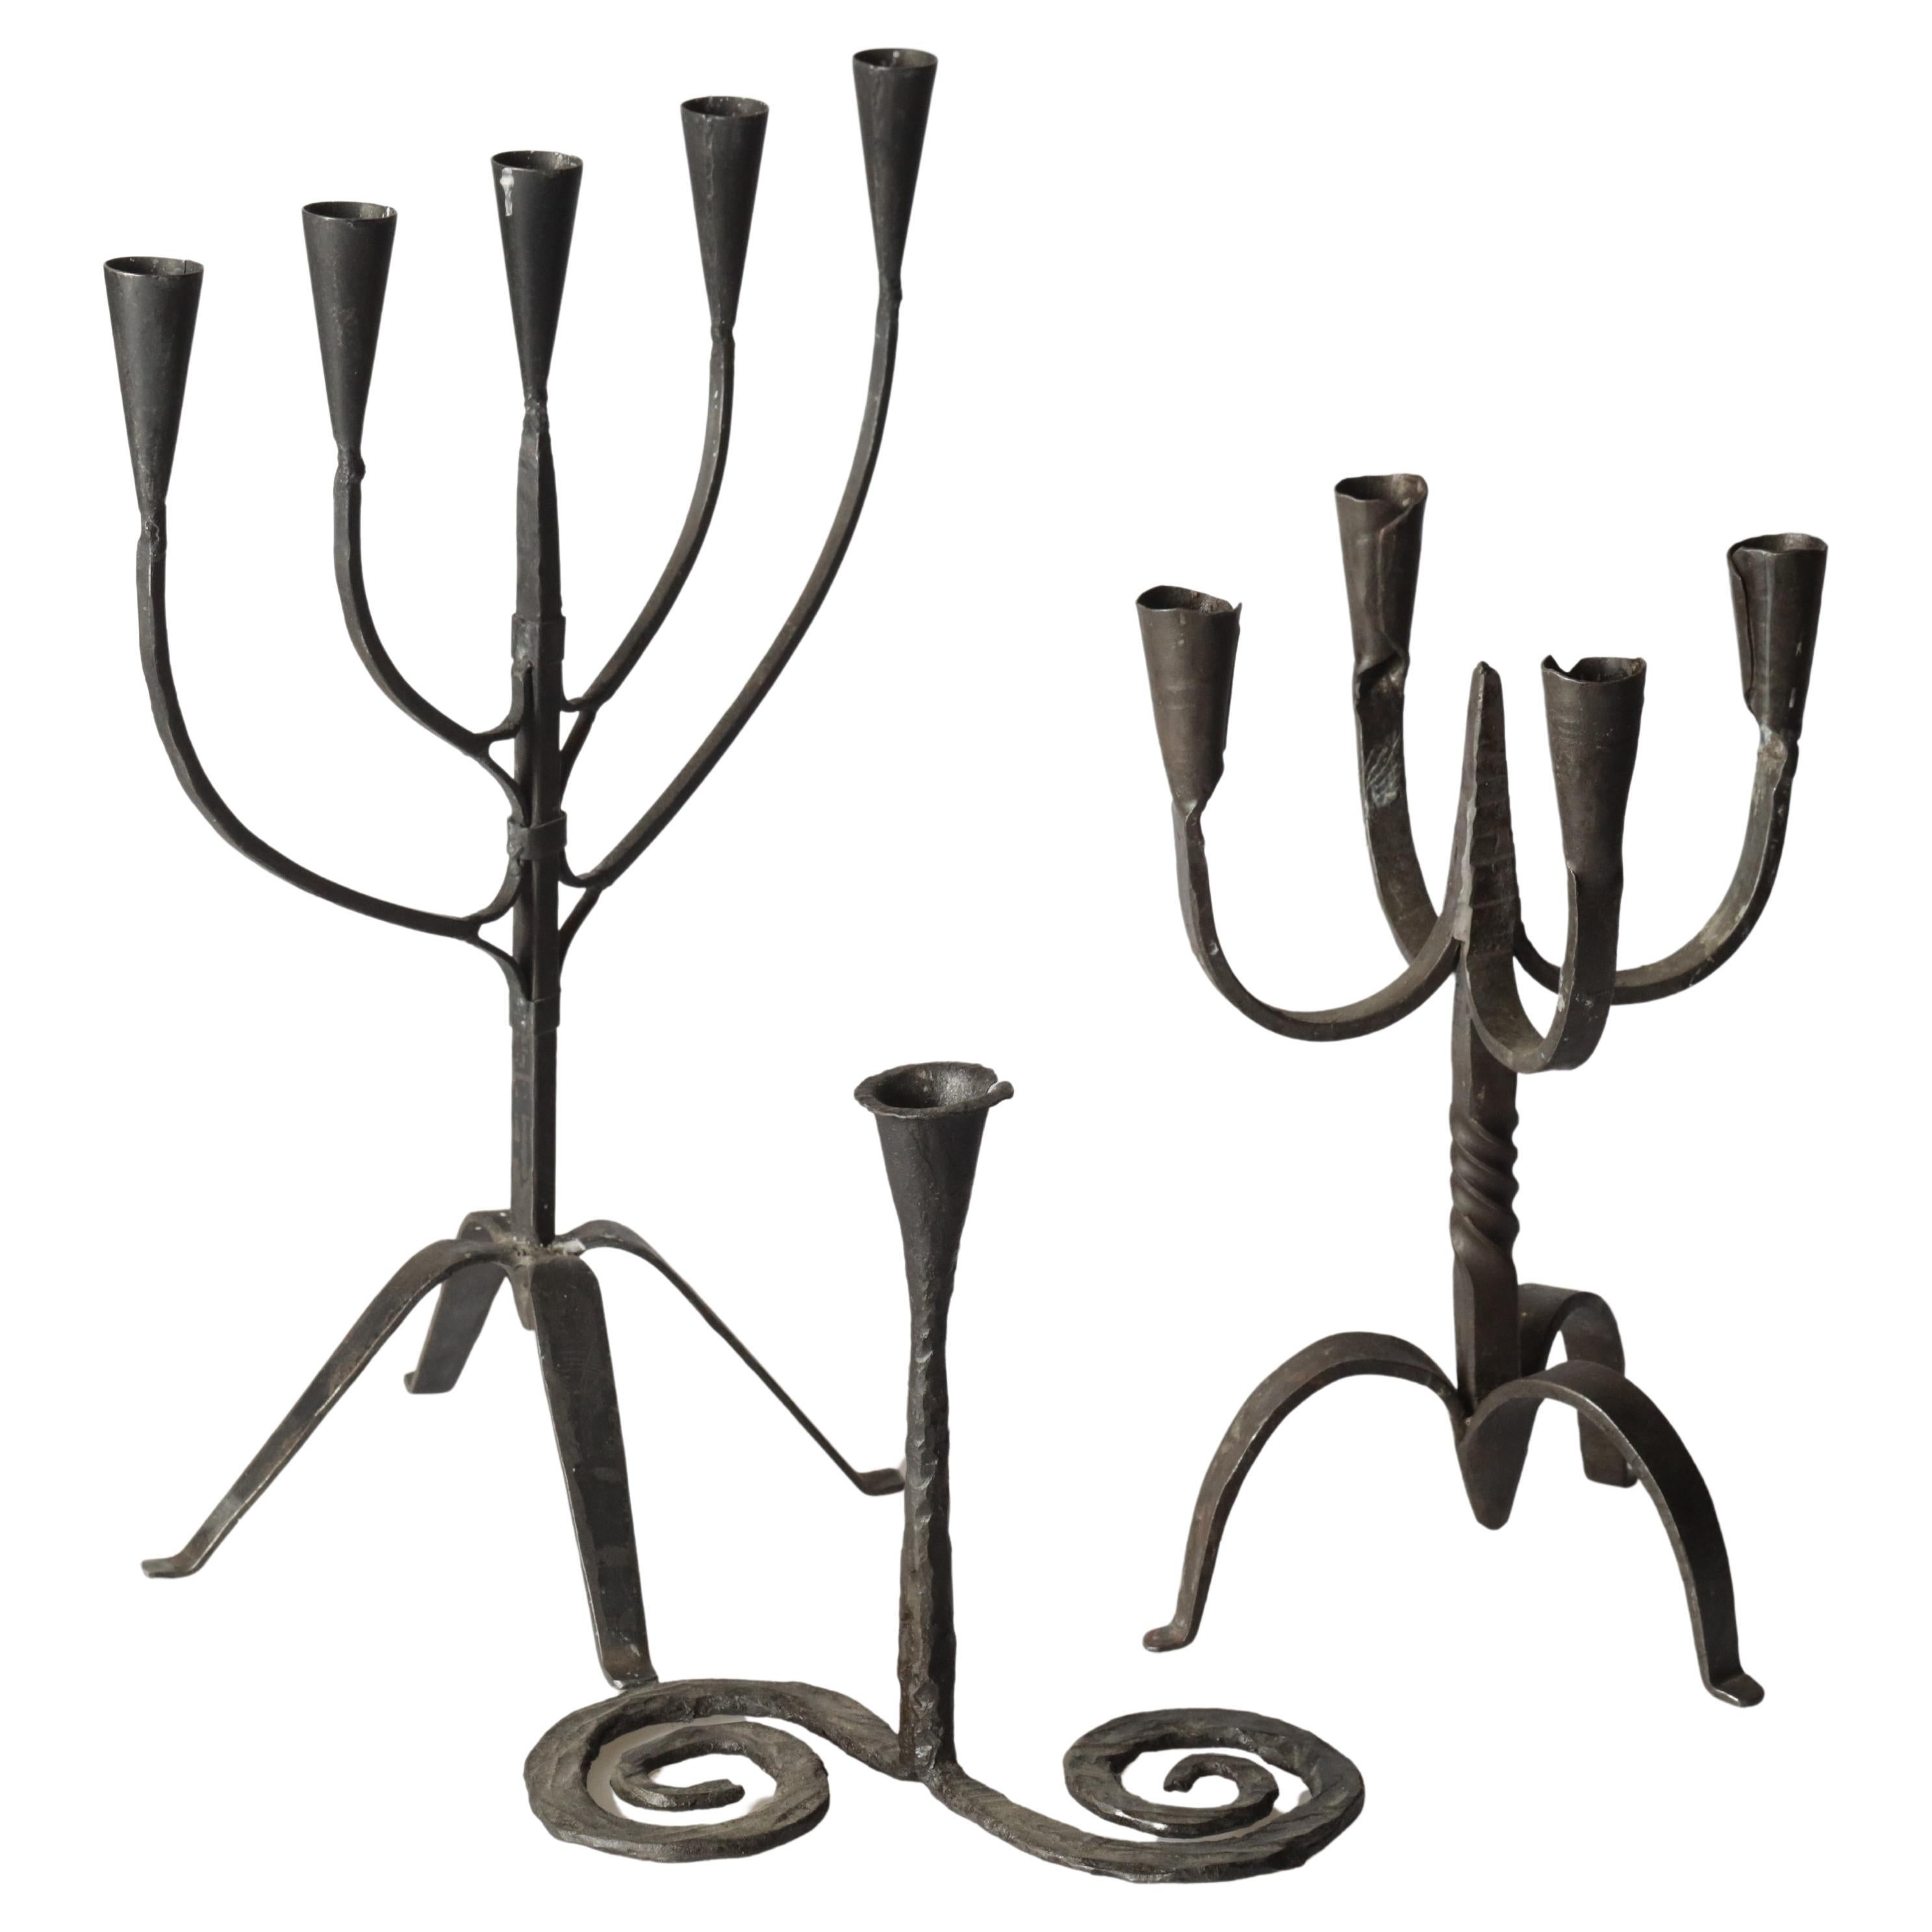 Black Swedish Antique Sculptural Candleholders in Cast Iron Produced late 1800s 